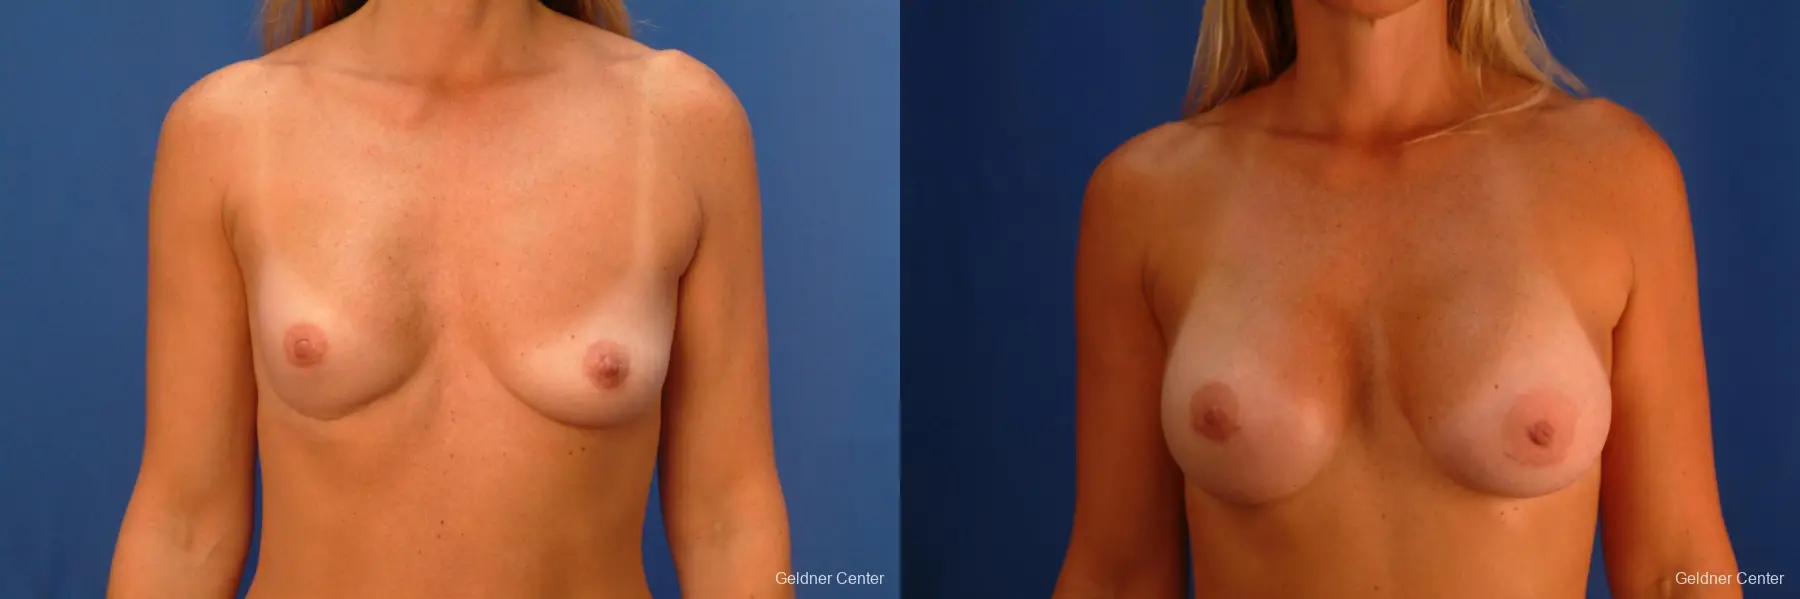 Complex Breast Augmentation Lake Shore Dr, Chicago 2419 - Before and After 1